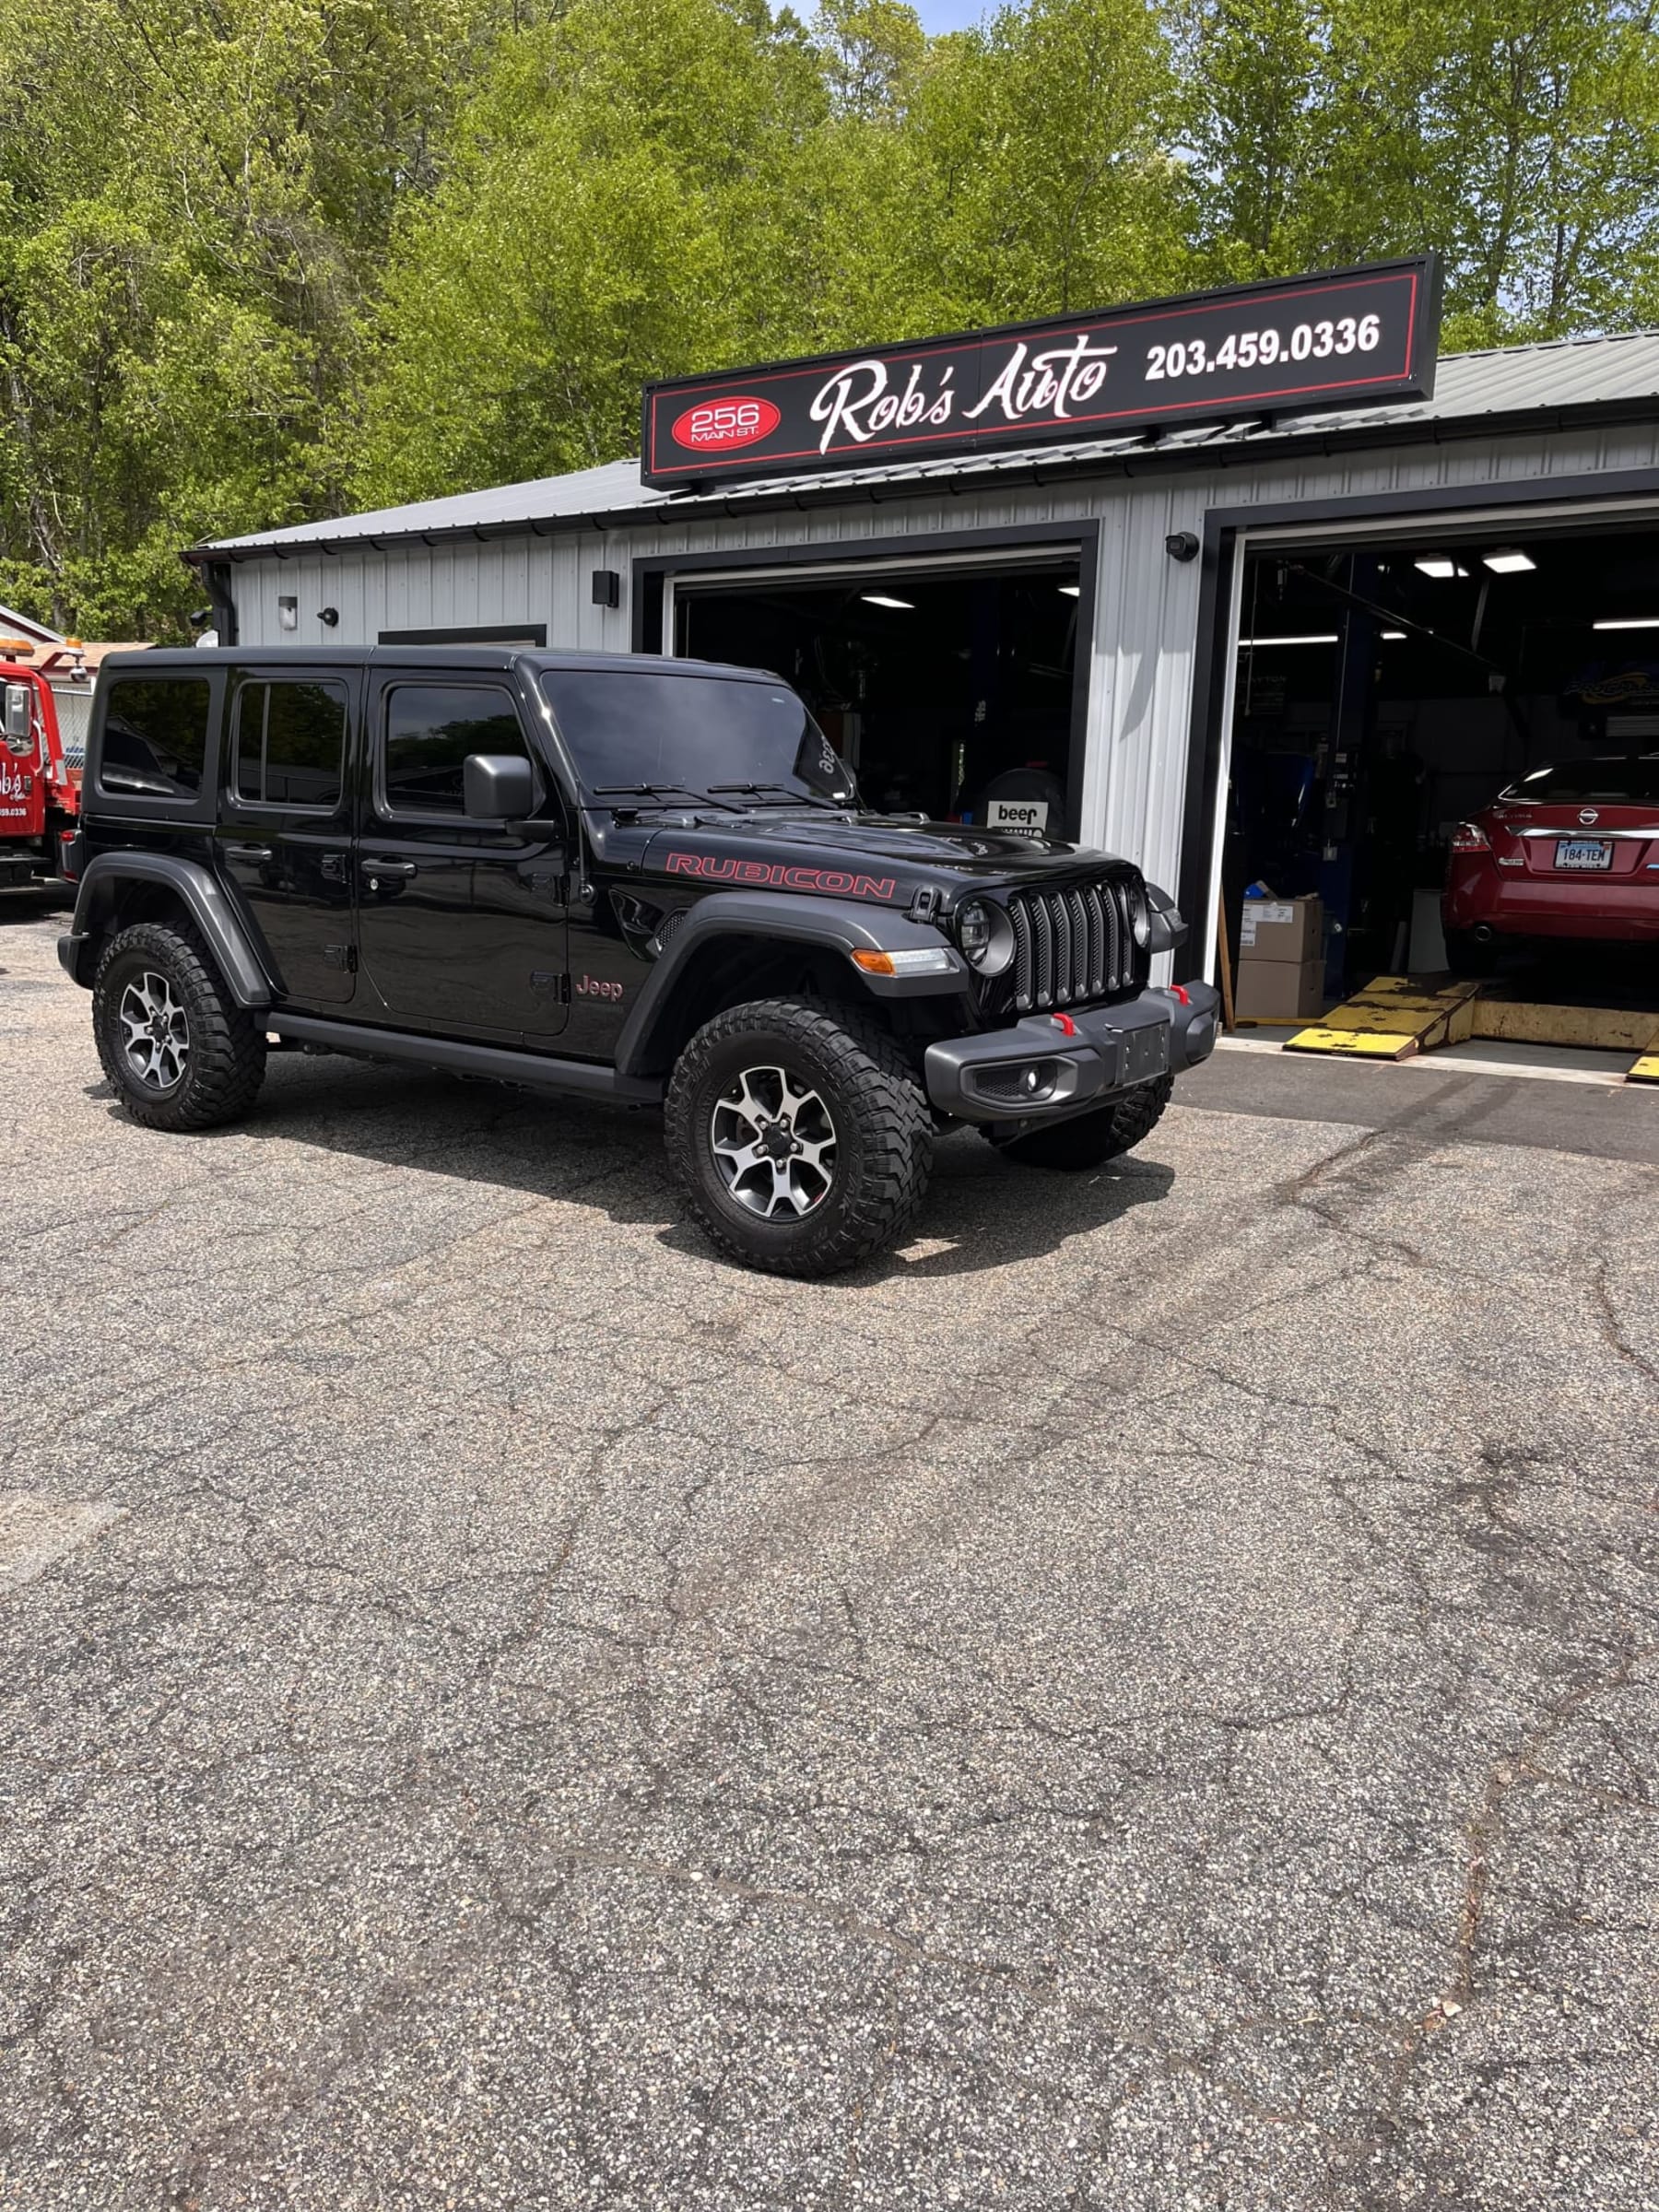 New Arrival!! 2020 Jeep Wrangler Unlimited Rubicon!! Only 26,800 miles! Loaded with heated seats and steering wheel, navigation, remote start, custom stitched leather seats from the factory, freedom hardtop, backup camera and much much more! Don’t miss this one! $47,900!